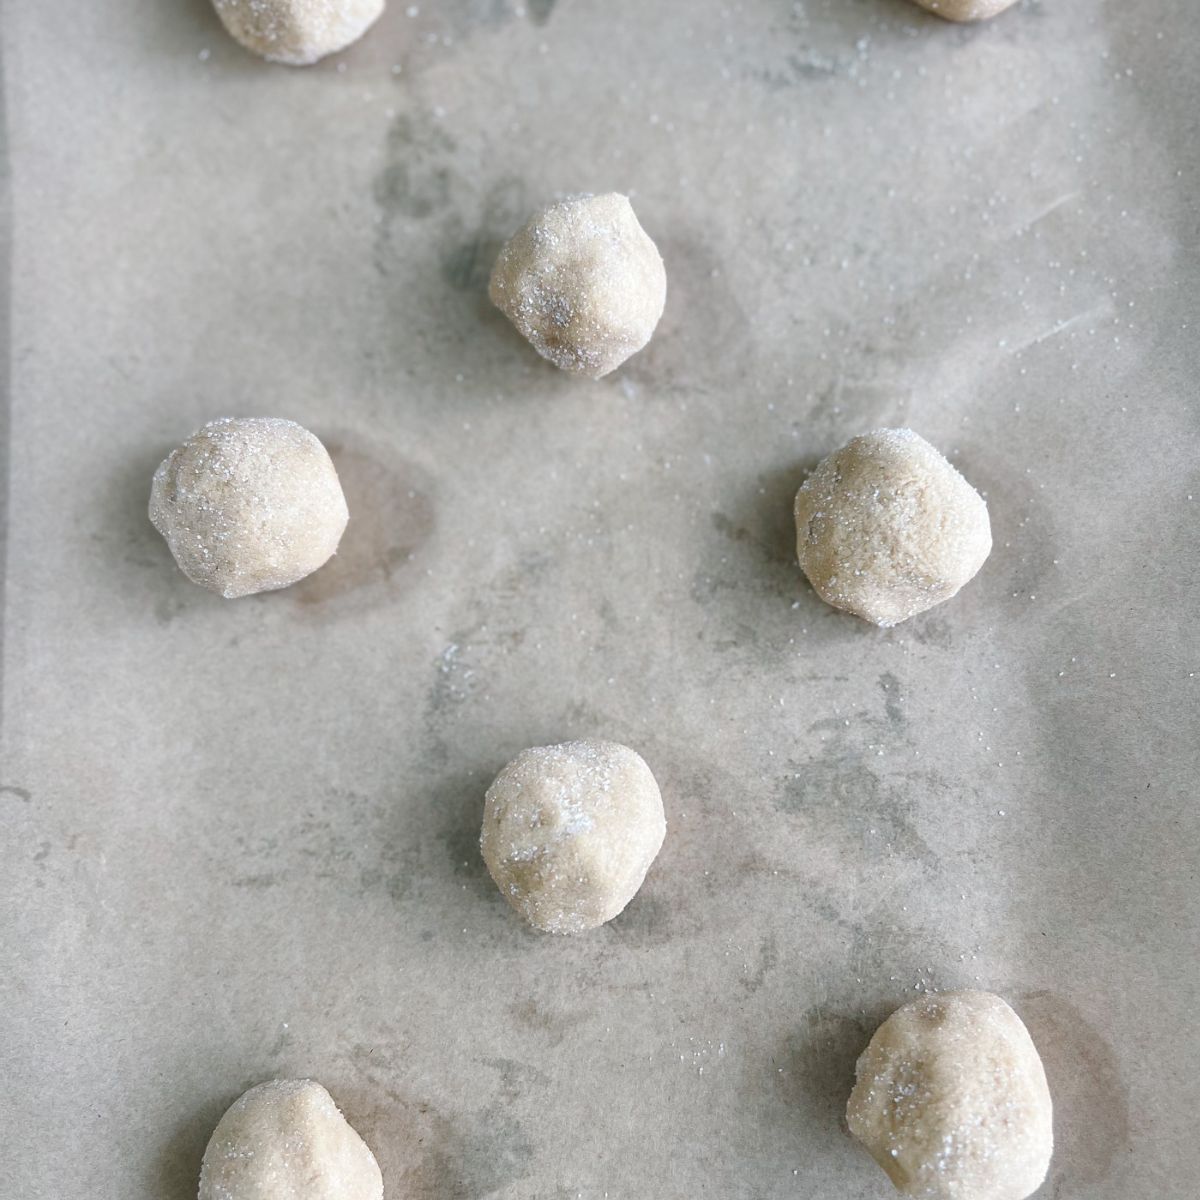 Cookie dough balls on a parchment paper lined baking sheet.